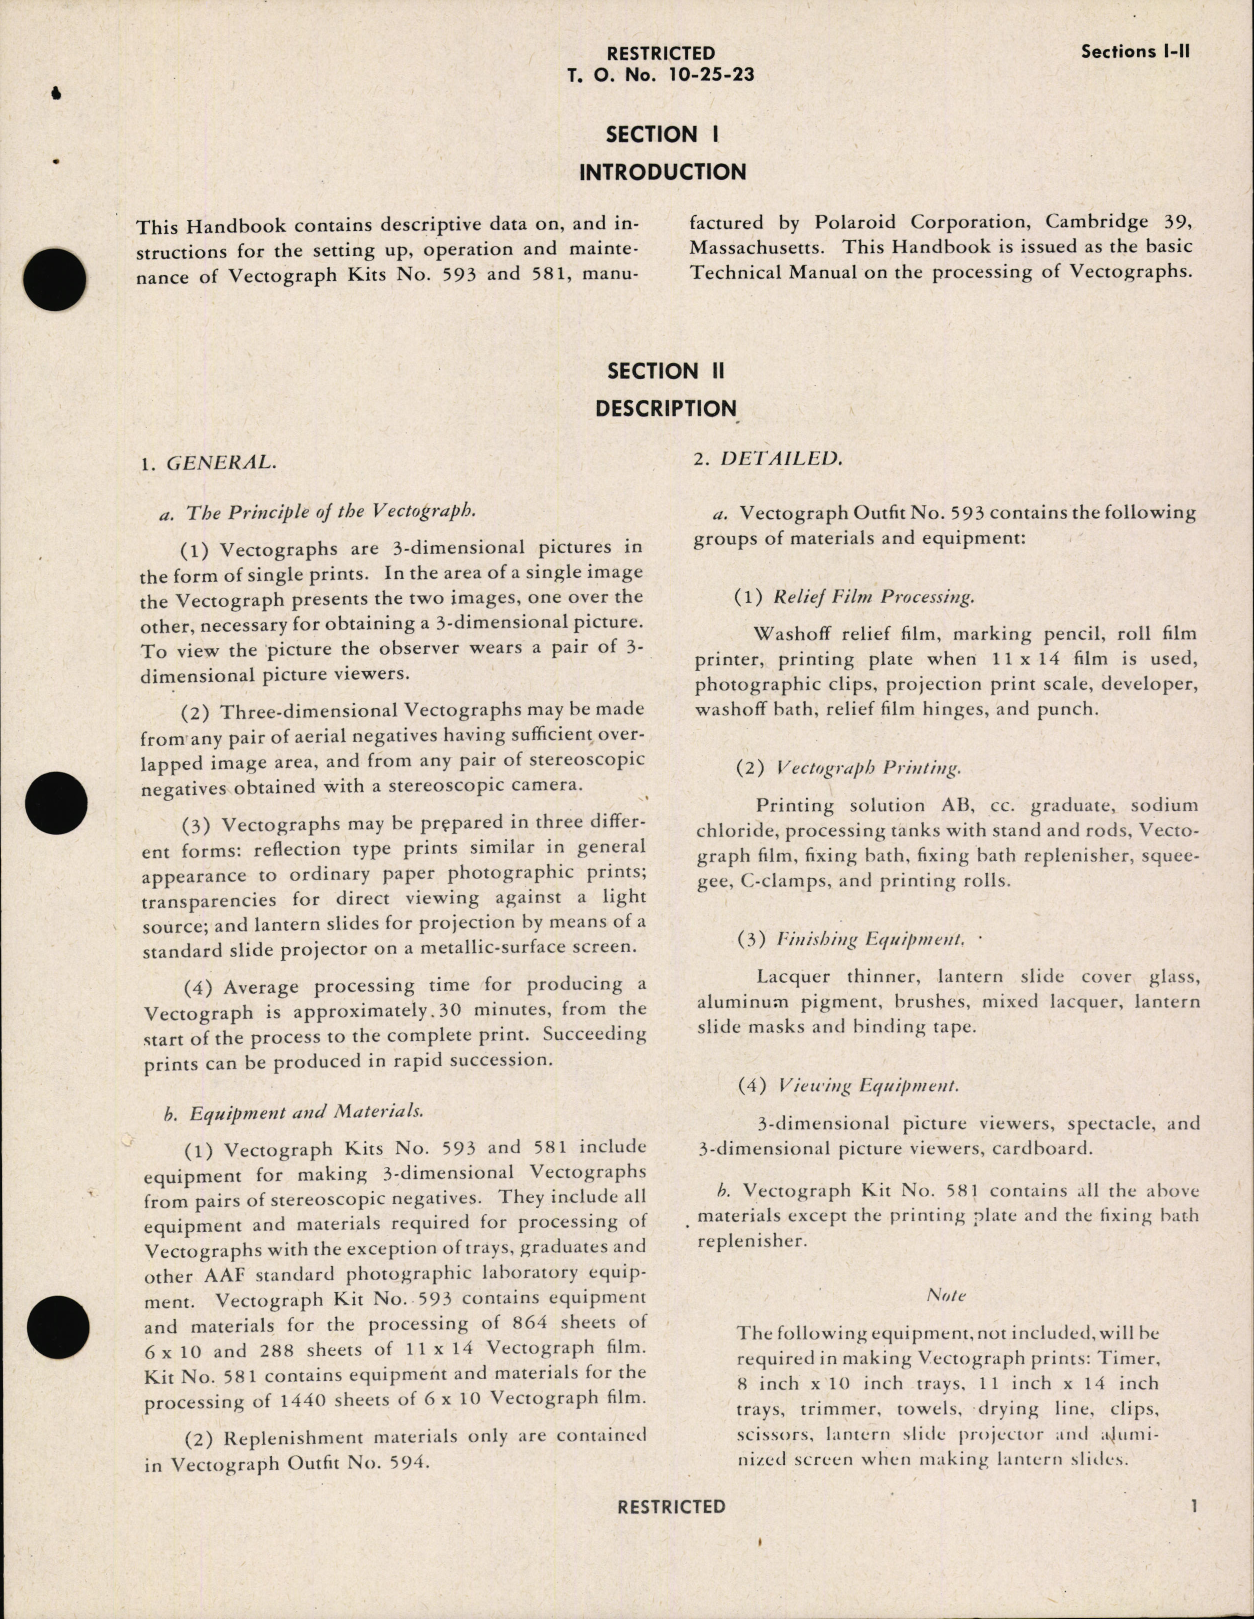 Sample page 5 from AirCorps Library document: Handbook of Instructions with Parts Catalog for Vectograph Kits Polaroid